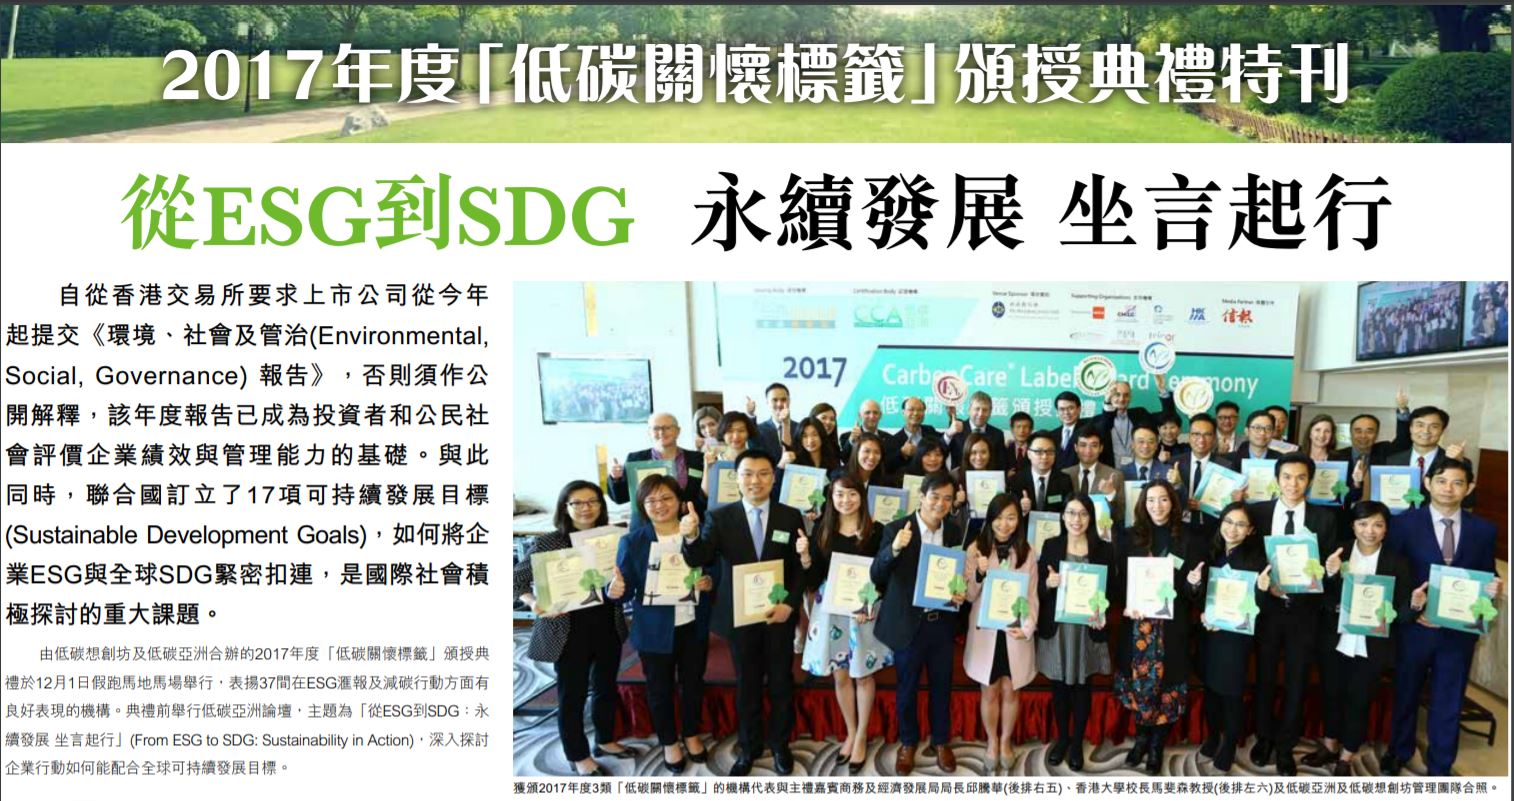 Cover Image for Hong Kong Economic Journal Special Supplement -
			Links Local Sustainability Reporting to the Global Agenda